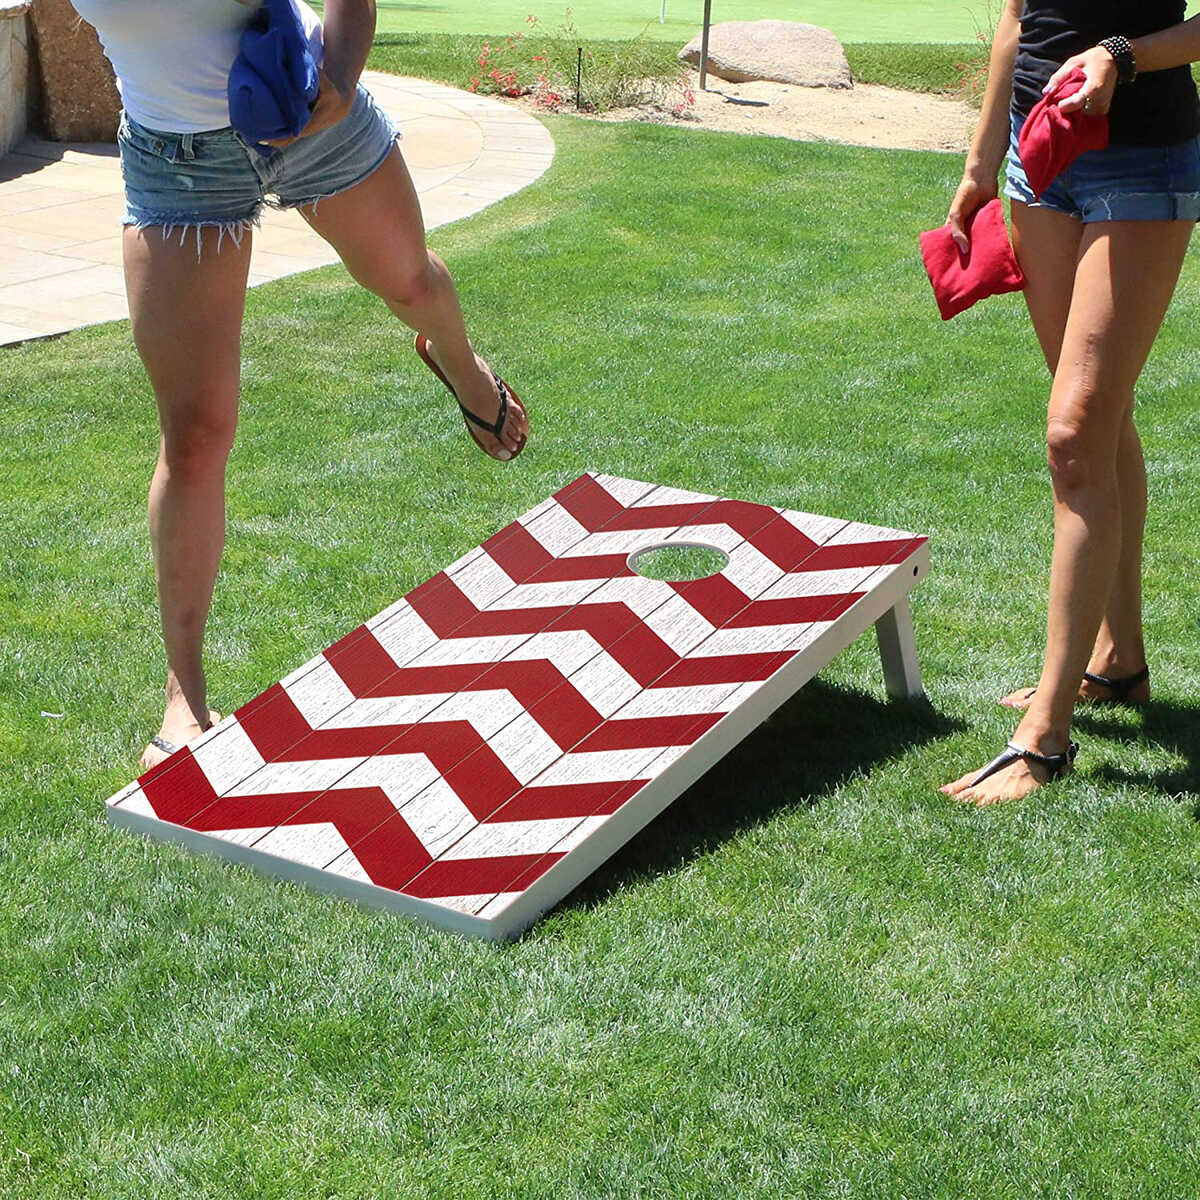 What Is The Regulation Distance For Cornhole?